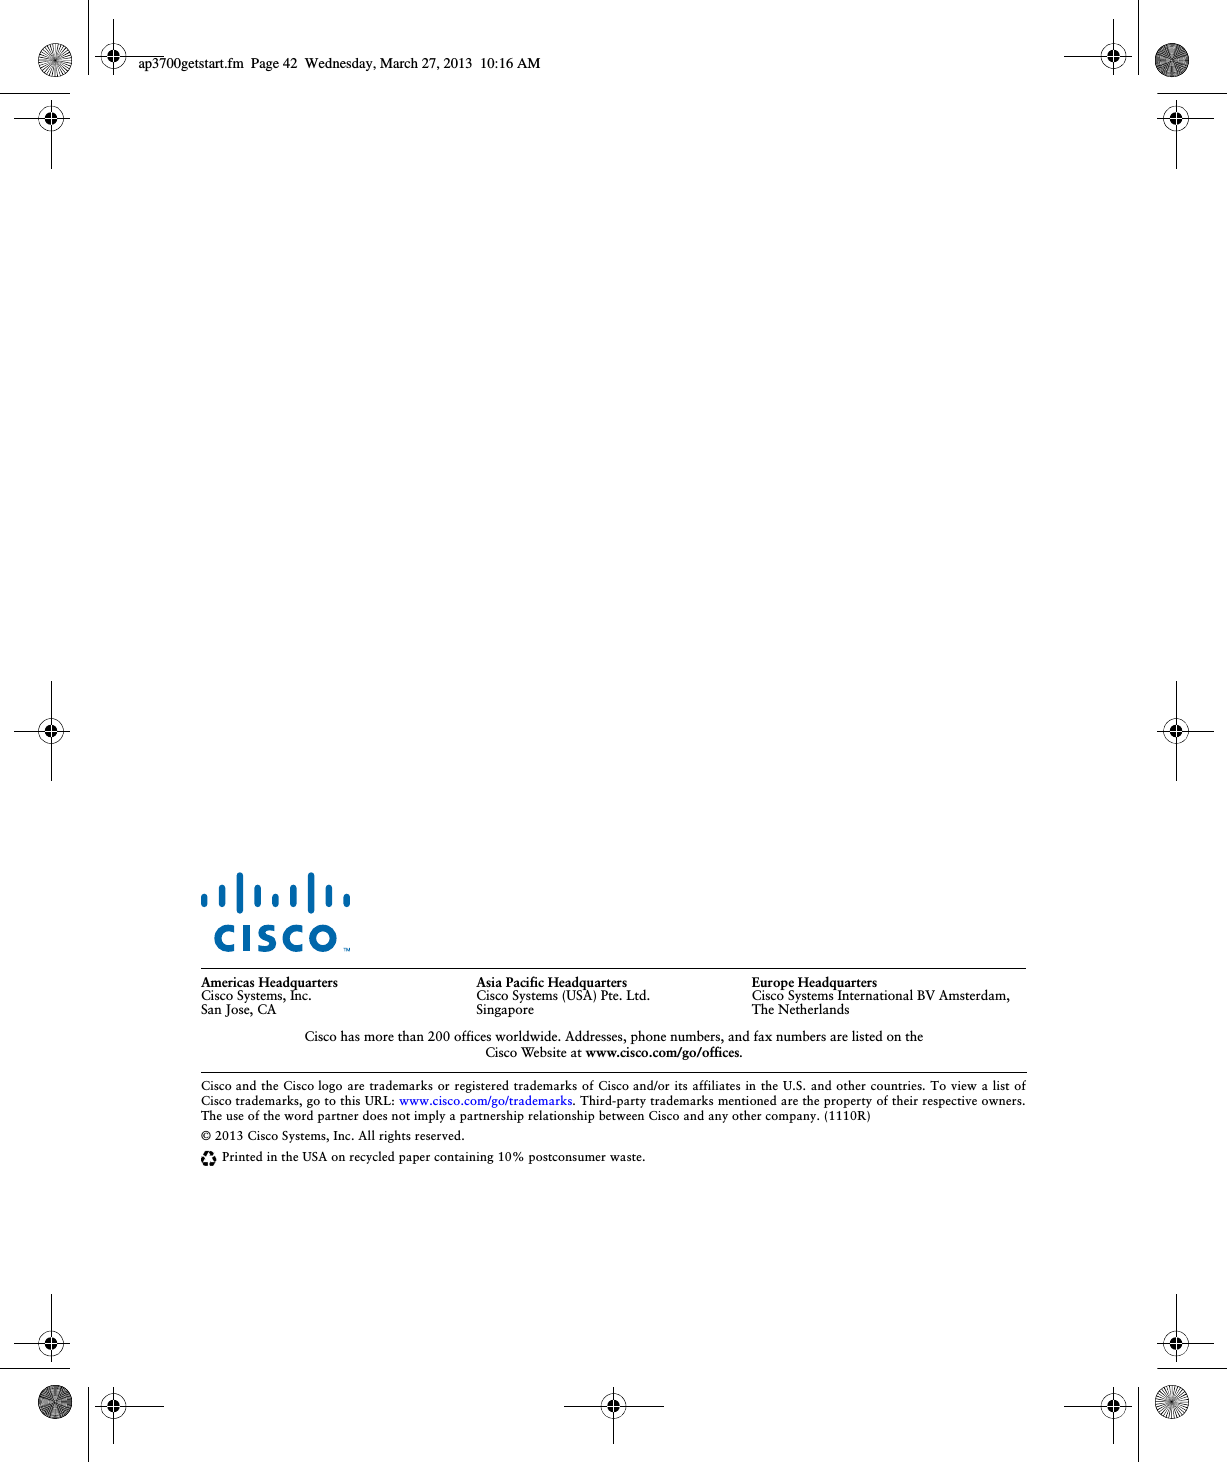  Cisco and the Cisco logo are trademarks or registered trademarks of Cisco and/or its affiliates in the U.S. and other countries. To view a list of Cisco trademarks, go to this URL: www.cisco.com/go/trademarks. Third-party trademarks mentioned are the property of their respective owners. The use of the word partner does not imply a partnership relationship between Cisco and any other company. (1110R)© 2013 Cisco Systems, Inc. All rights reserved.Printed in the USA on recycled paper containing 10% postconsumer waste.Americas HeadquartersCisco Systems, Inc.San Jose, CAAsia Pacific HeadquartersCisco Systems (USA) Pte. Ltd.SingaporeEurope HeadquartersCisco Systems International BV Amsterdam,  The NetherlandsCisco has more than 200 offices worldwide. Addresses, phone numbers, and fax numbers are listed on the  Cisco Website at www.cisco.com/go/offices.ap3700getstart.fm  Page 42  Wednesday, March 27, 2013  10:16 AM